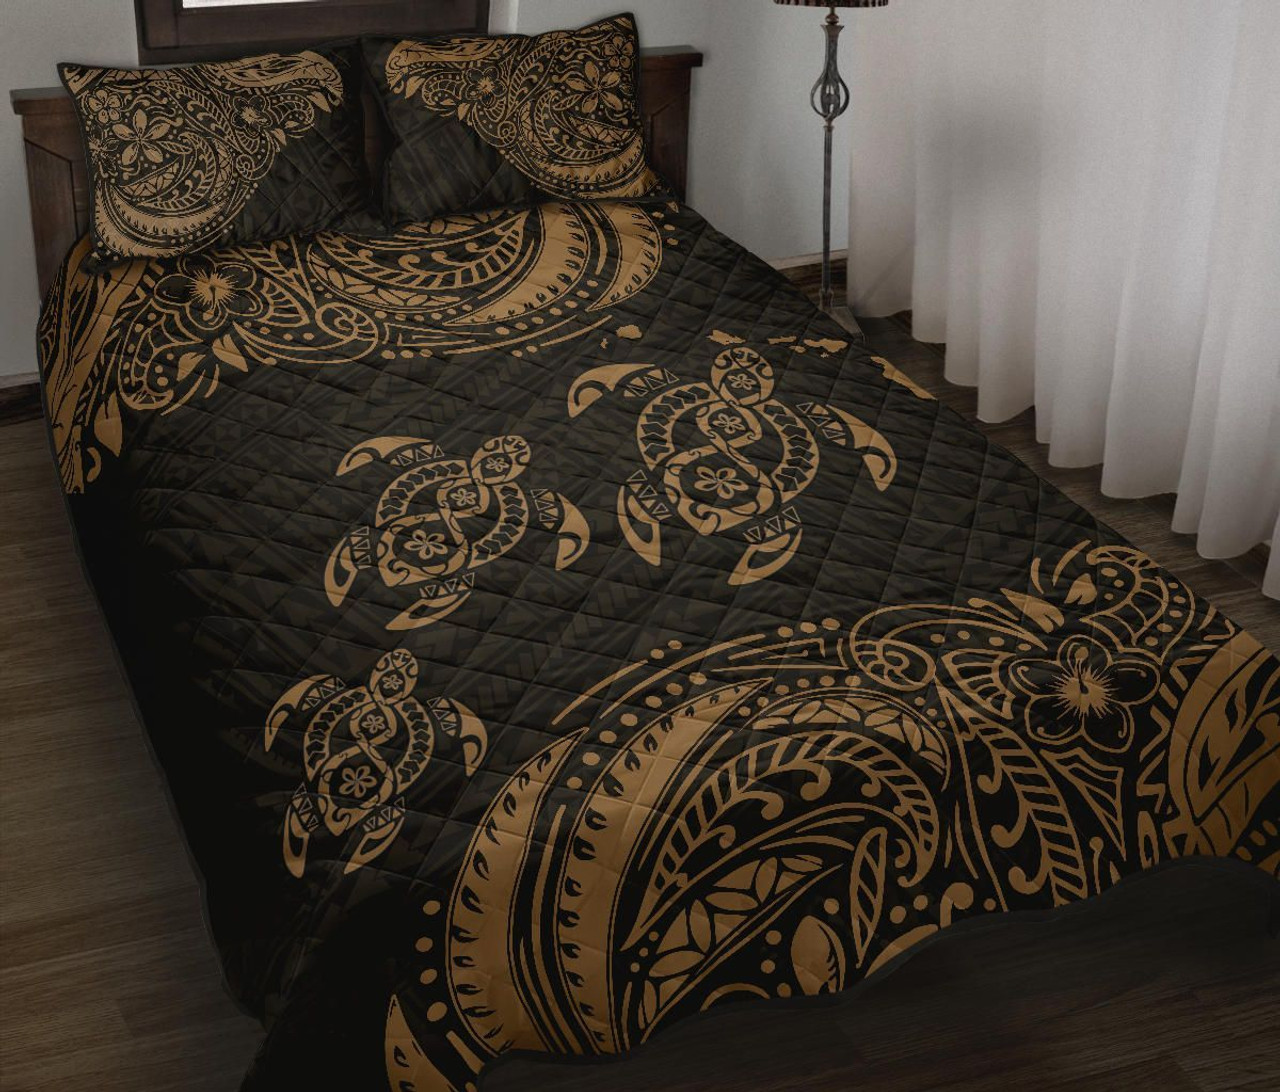 Hawaii Polynesian Quilt Bed Set - Gold Sea Turtle 1